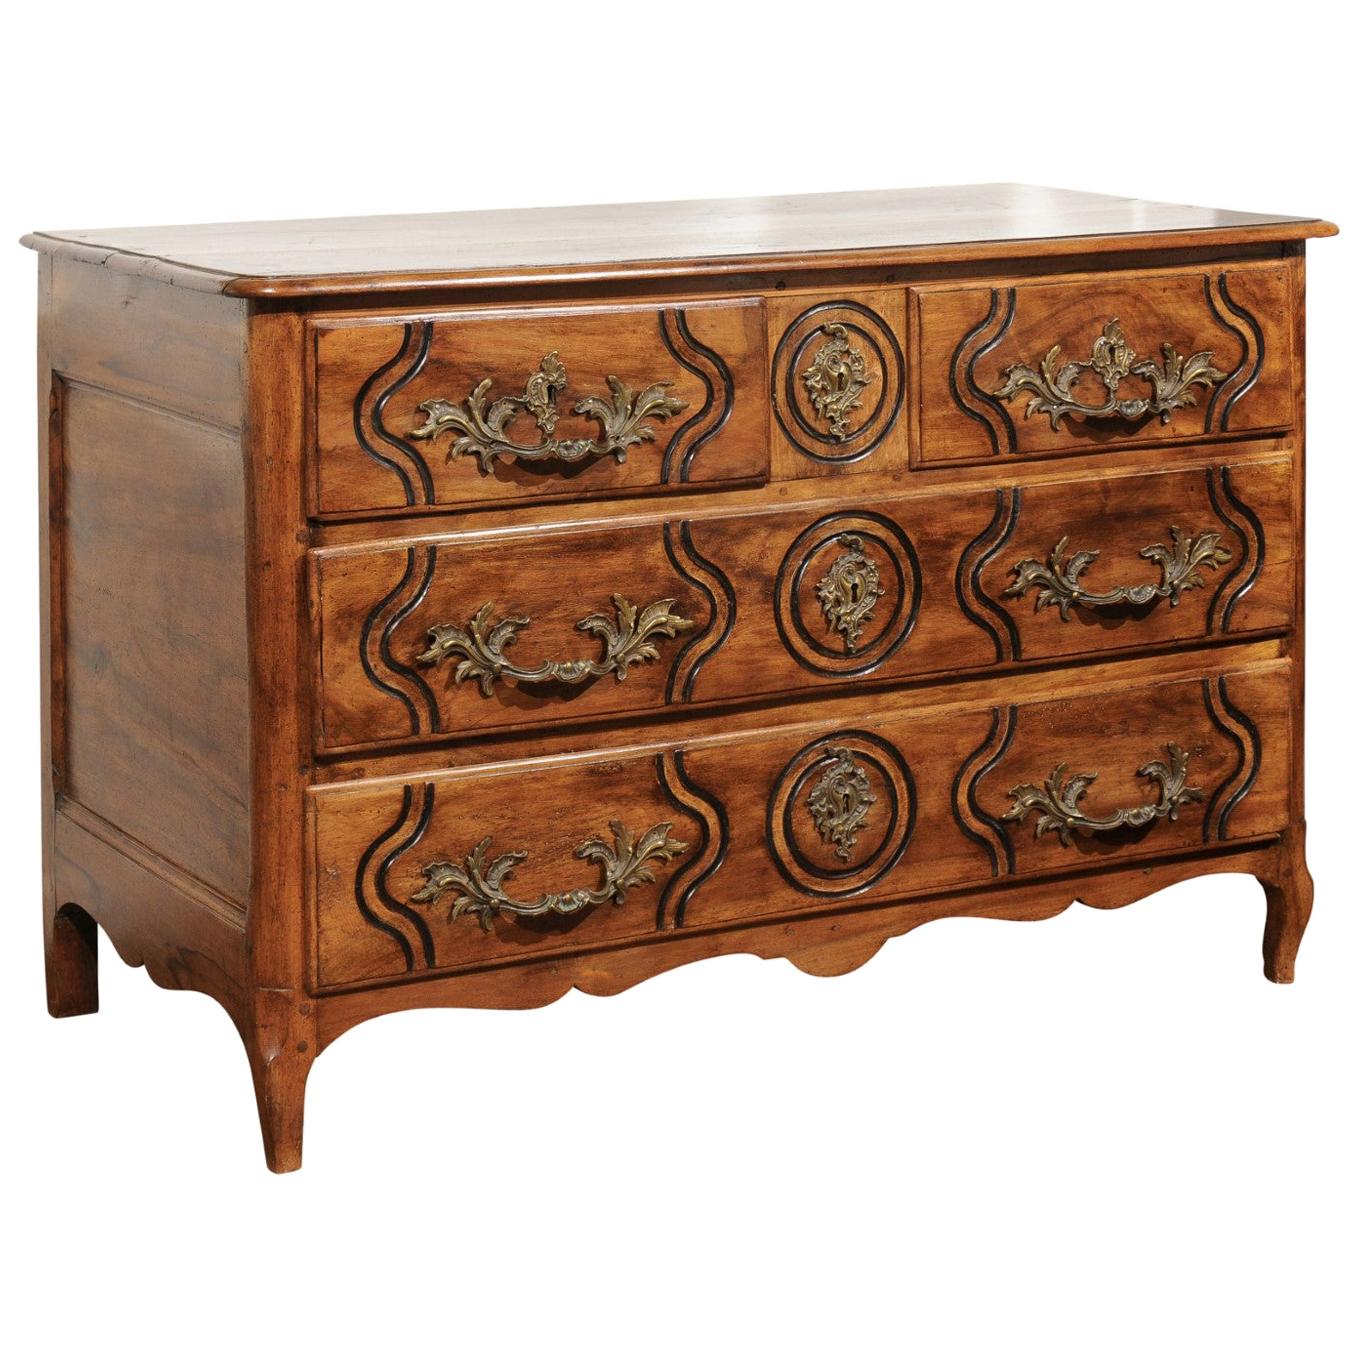 French Napoleon III Period Parisienne Commode with Four Drawers, circa 1850